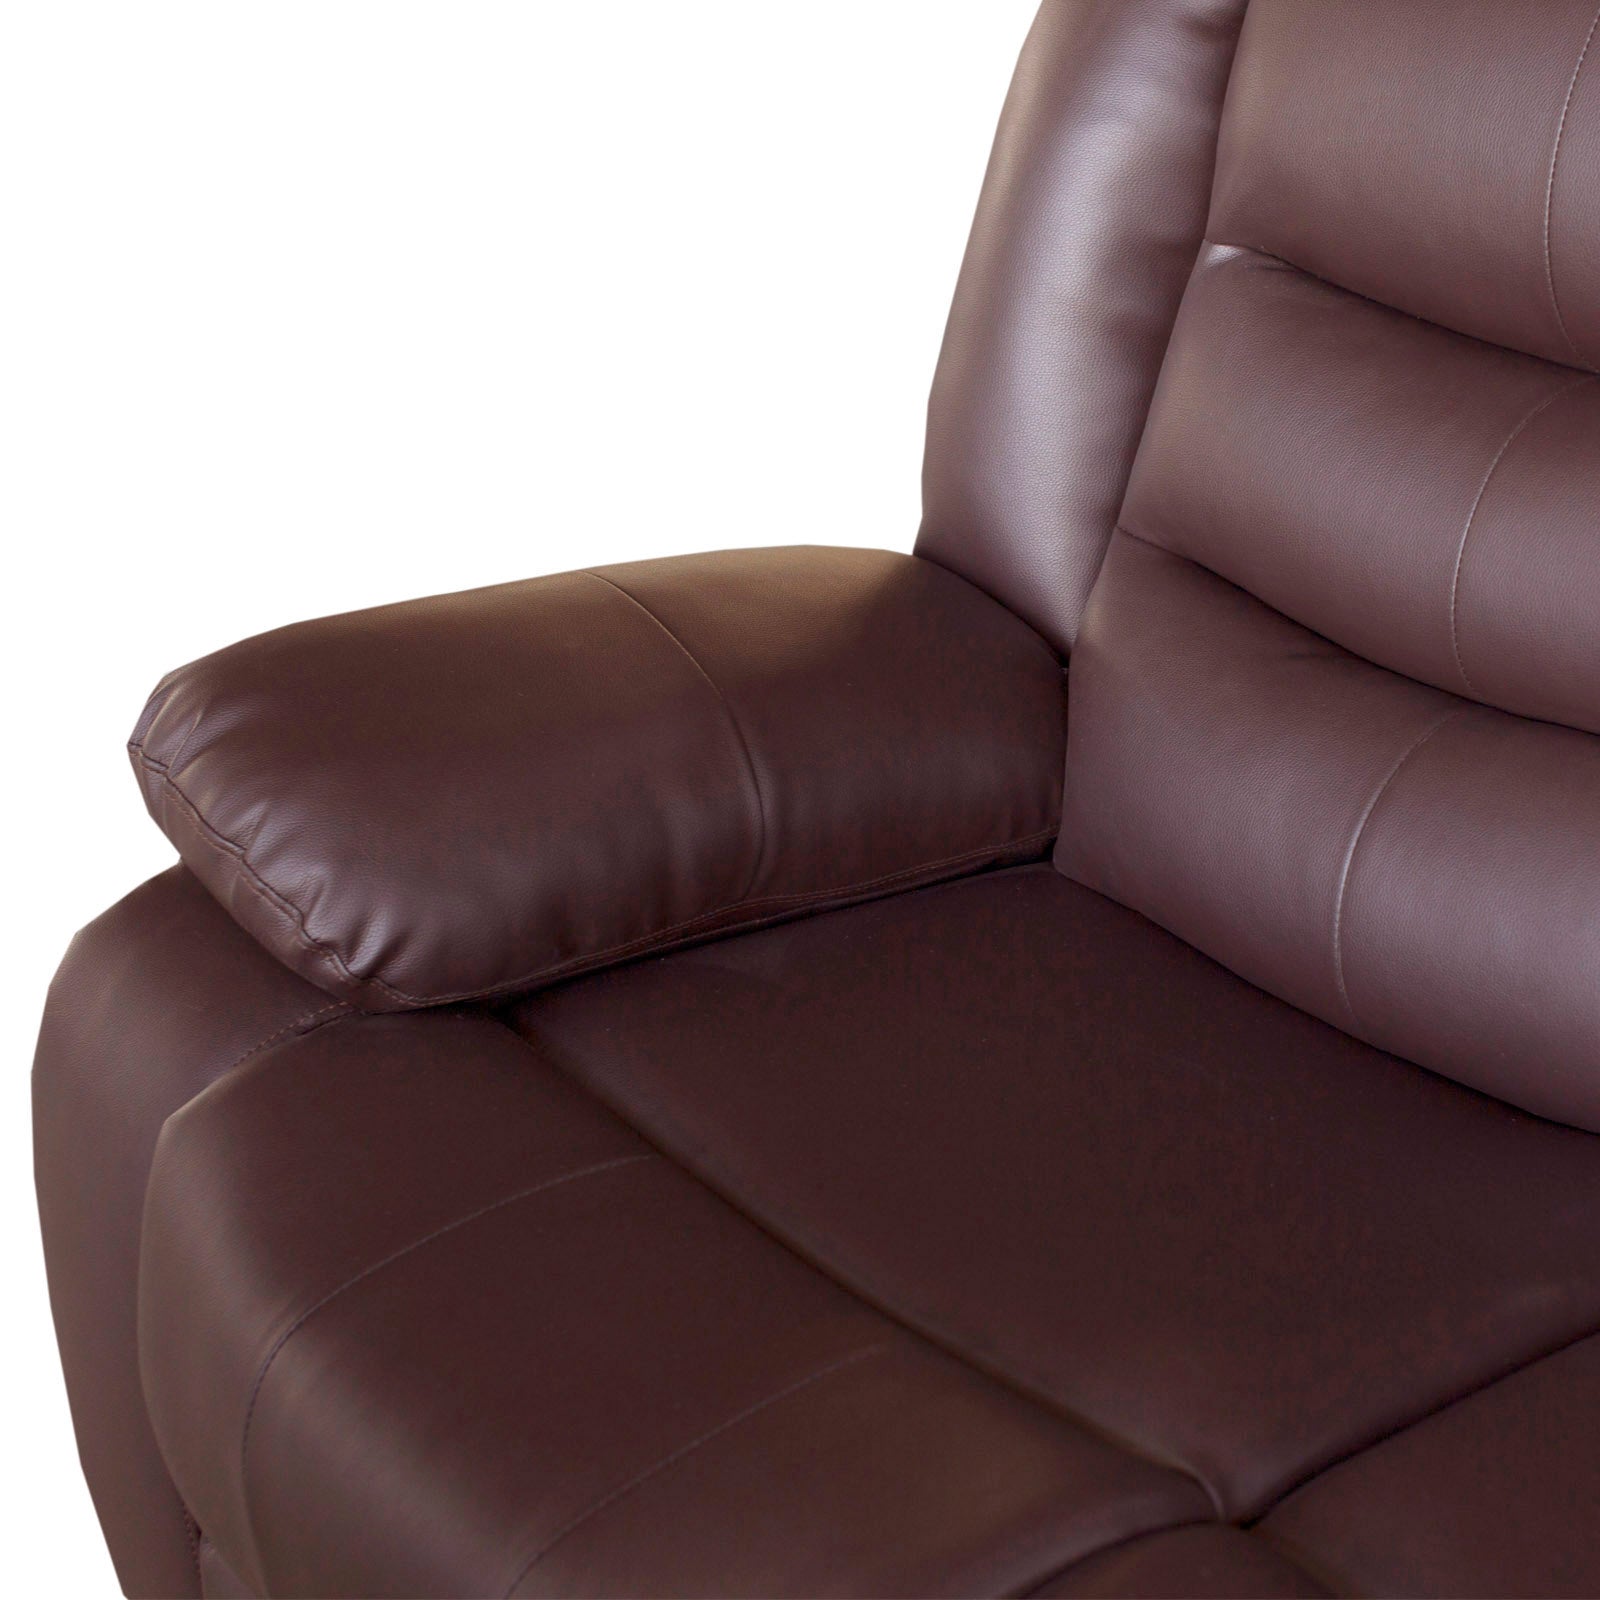 3+2 Seater Recliner Sofa In Faux Leather Lounge Couch in Brown